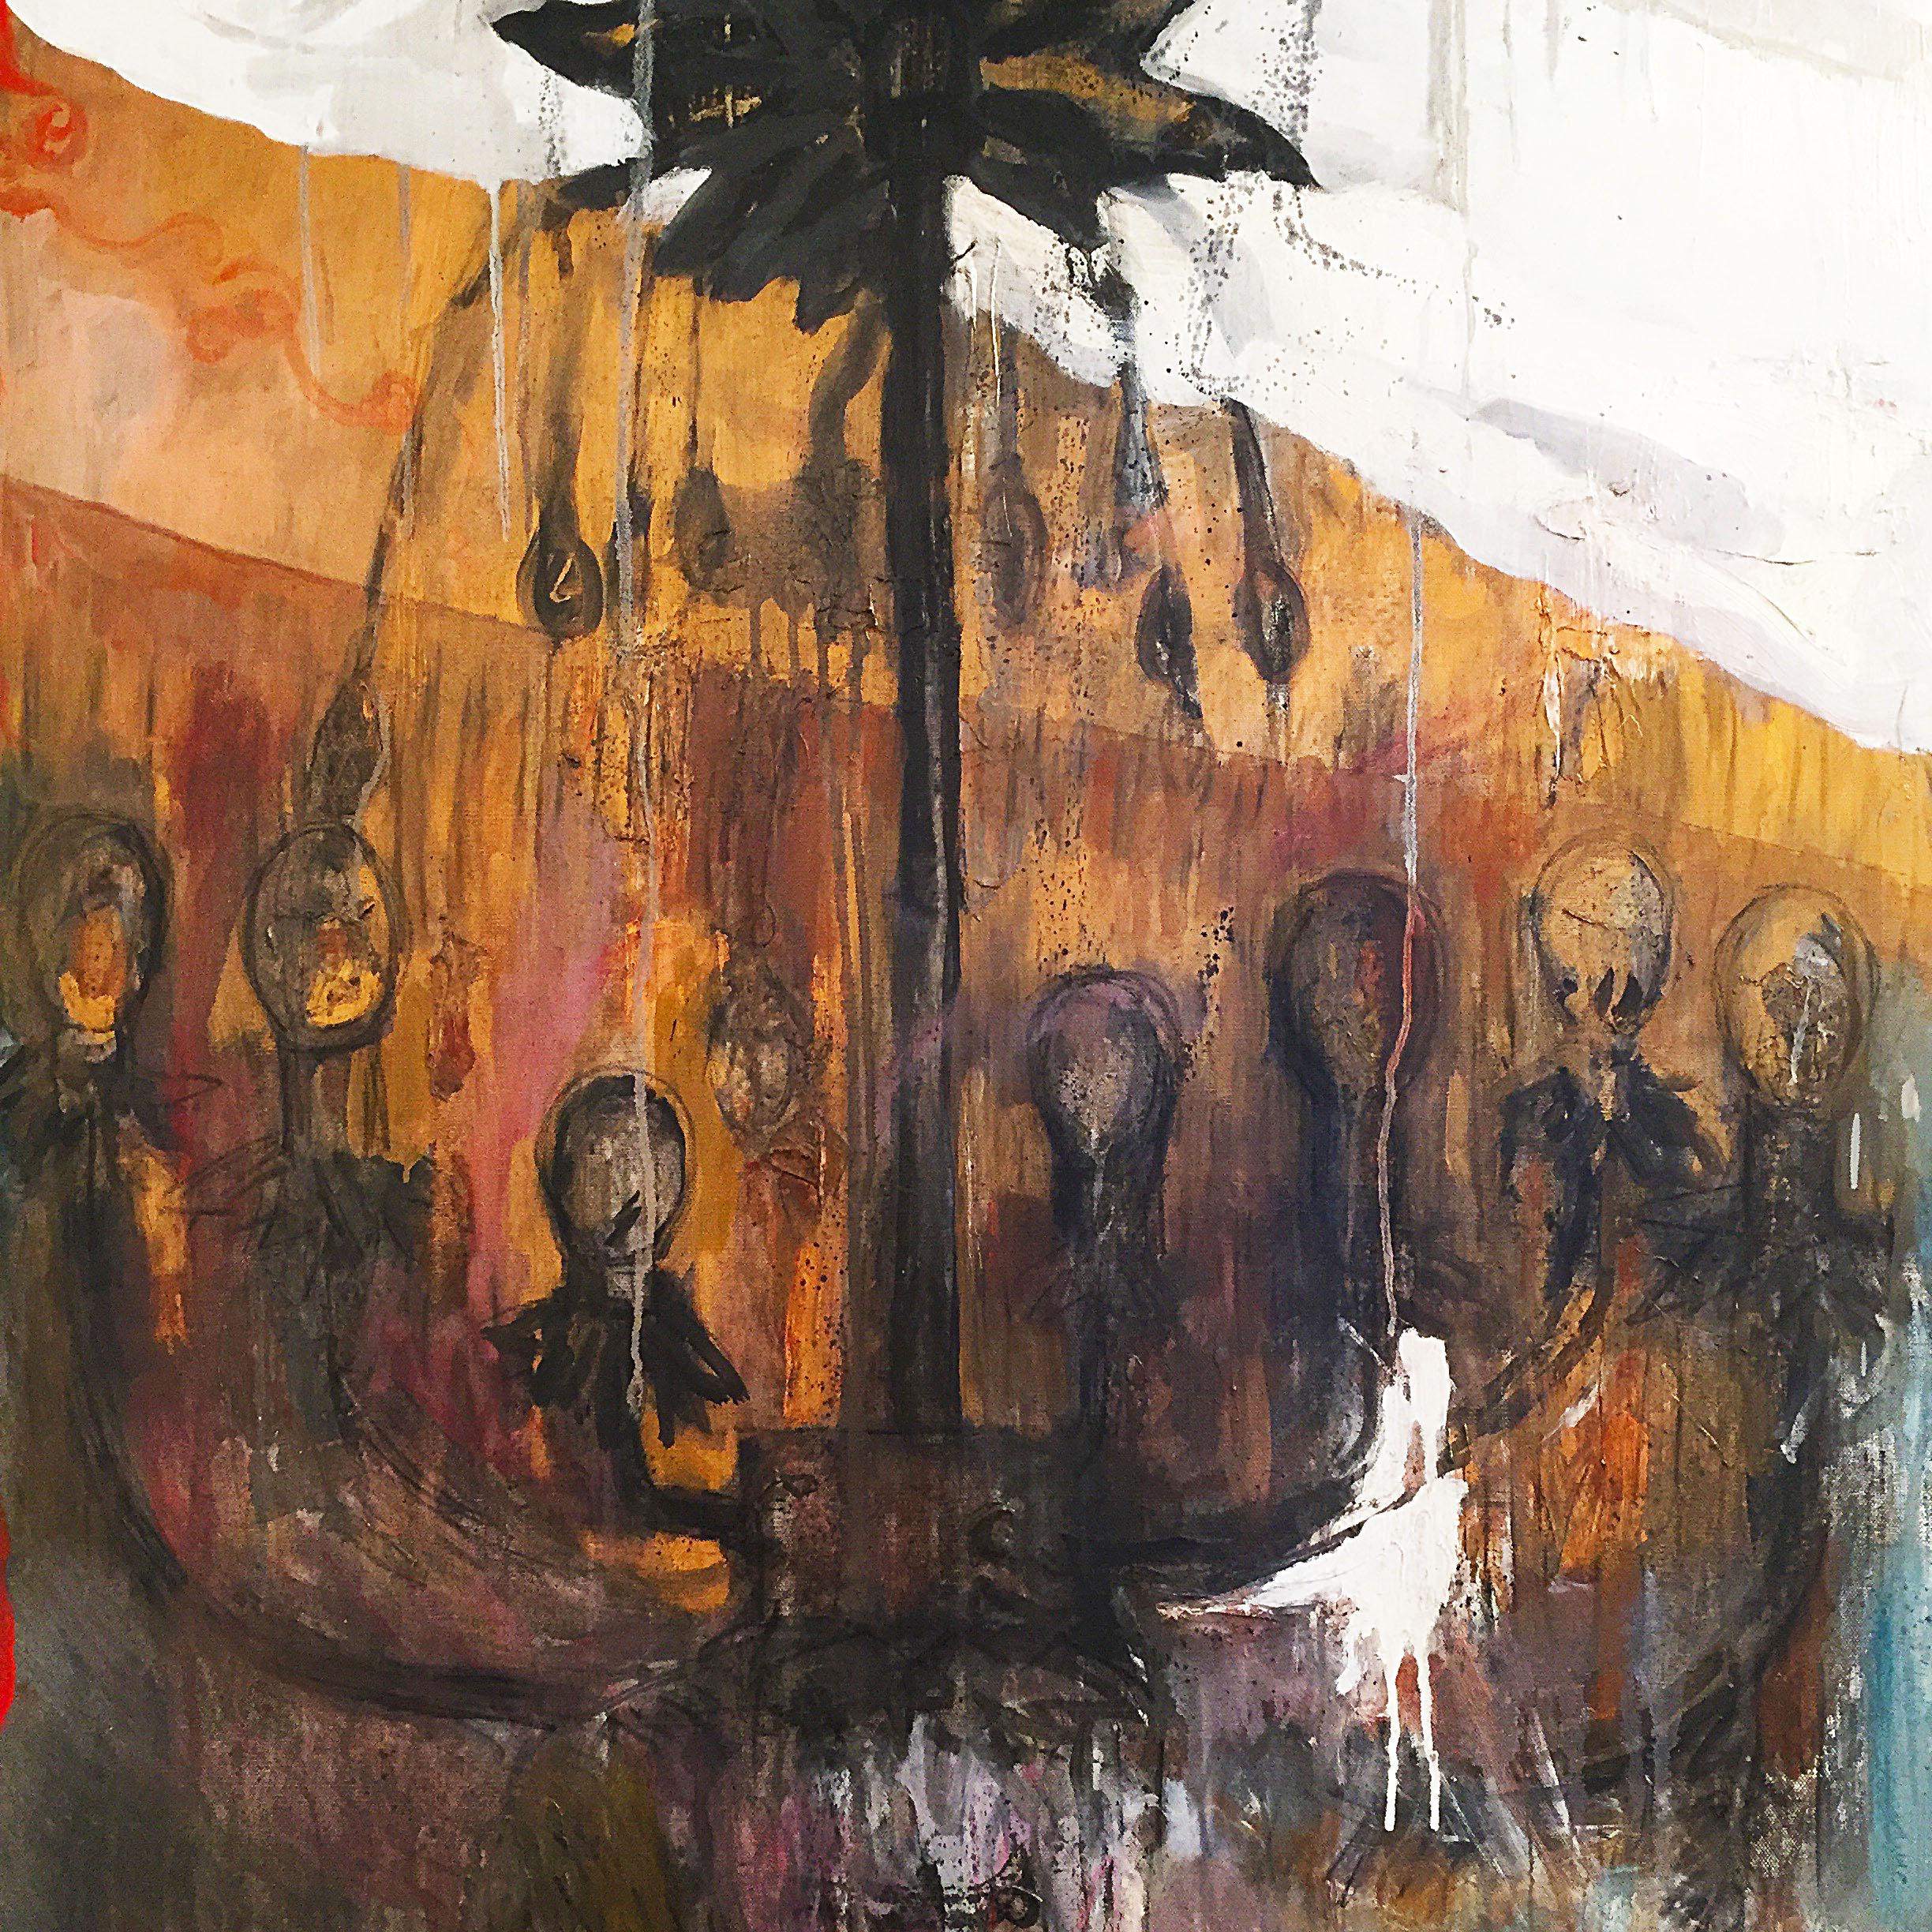 An explosive painting called 'The Chandelier' with a group of people seating around the chandelier. Light but strong brushstrokes fires up this painting. Timor Cervenak was a former taxi driver in Belfast from Czech who turned his talent into